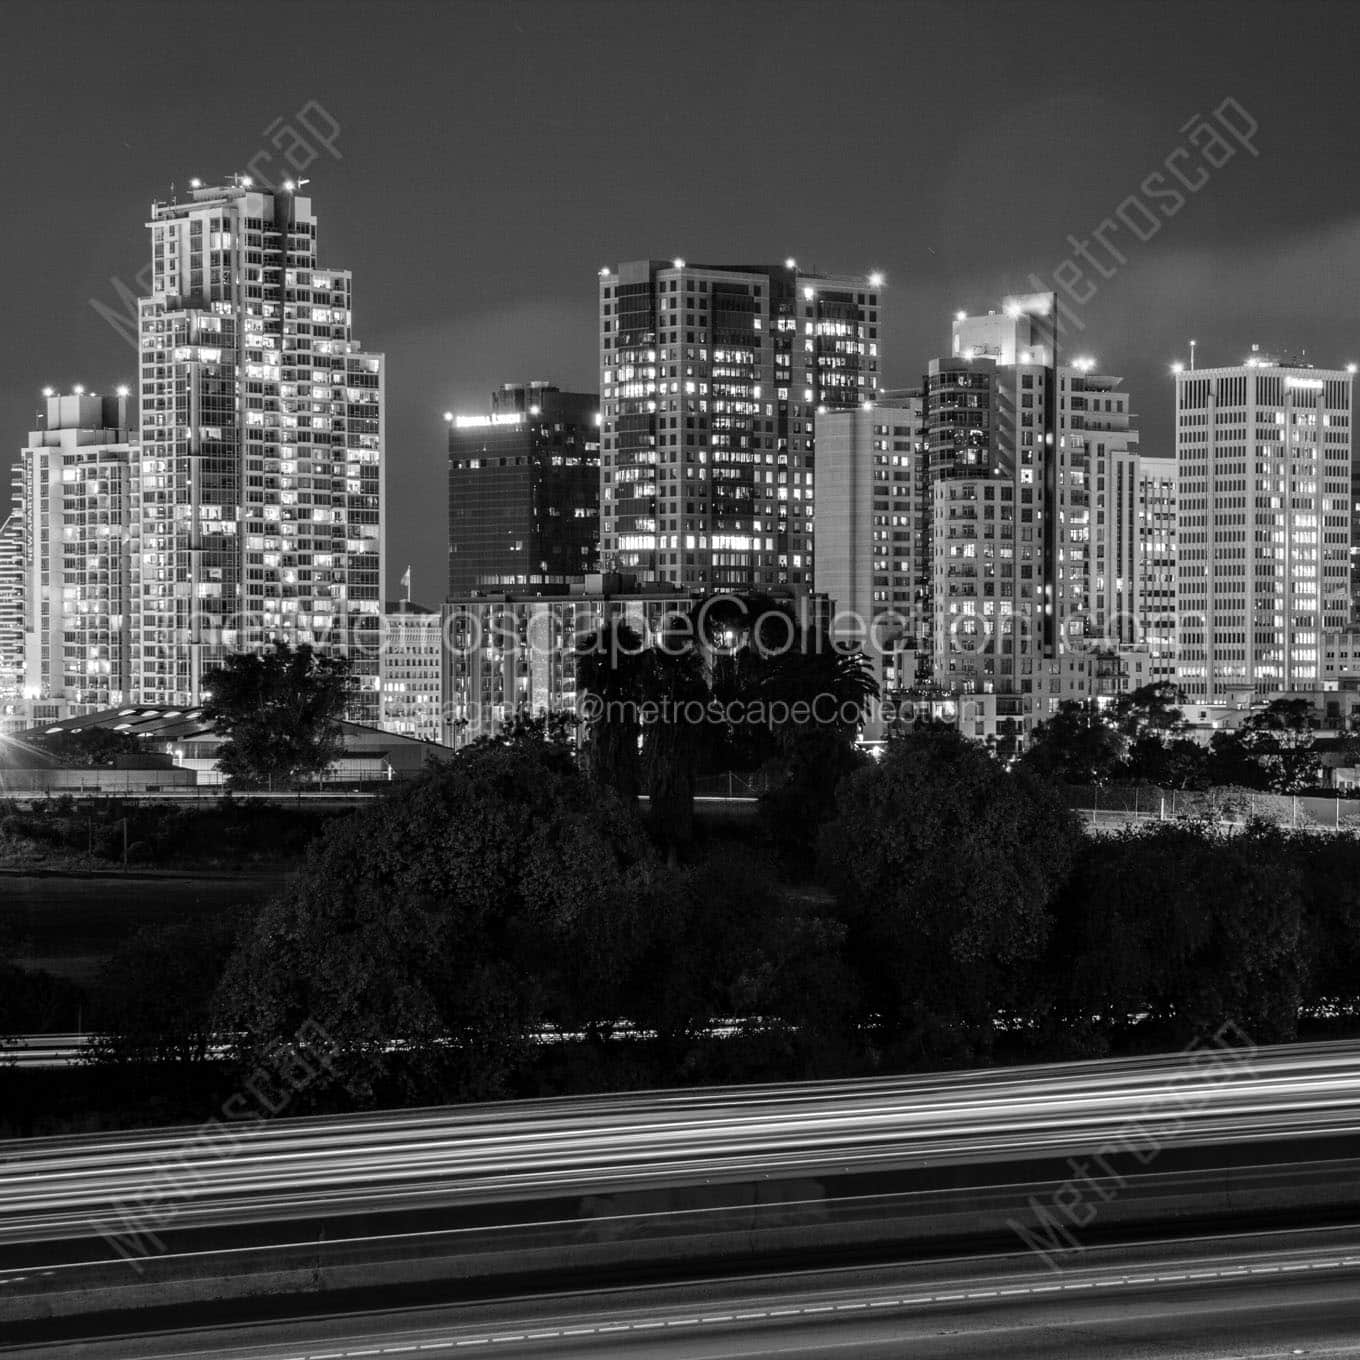 downtown san diego at night camino real freeway Black & White Office Art